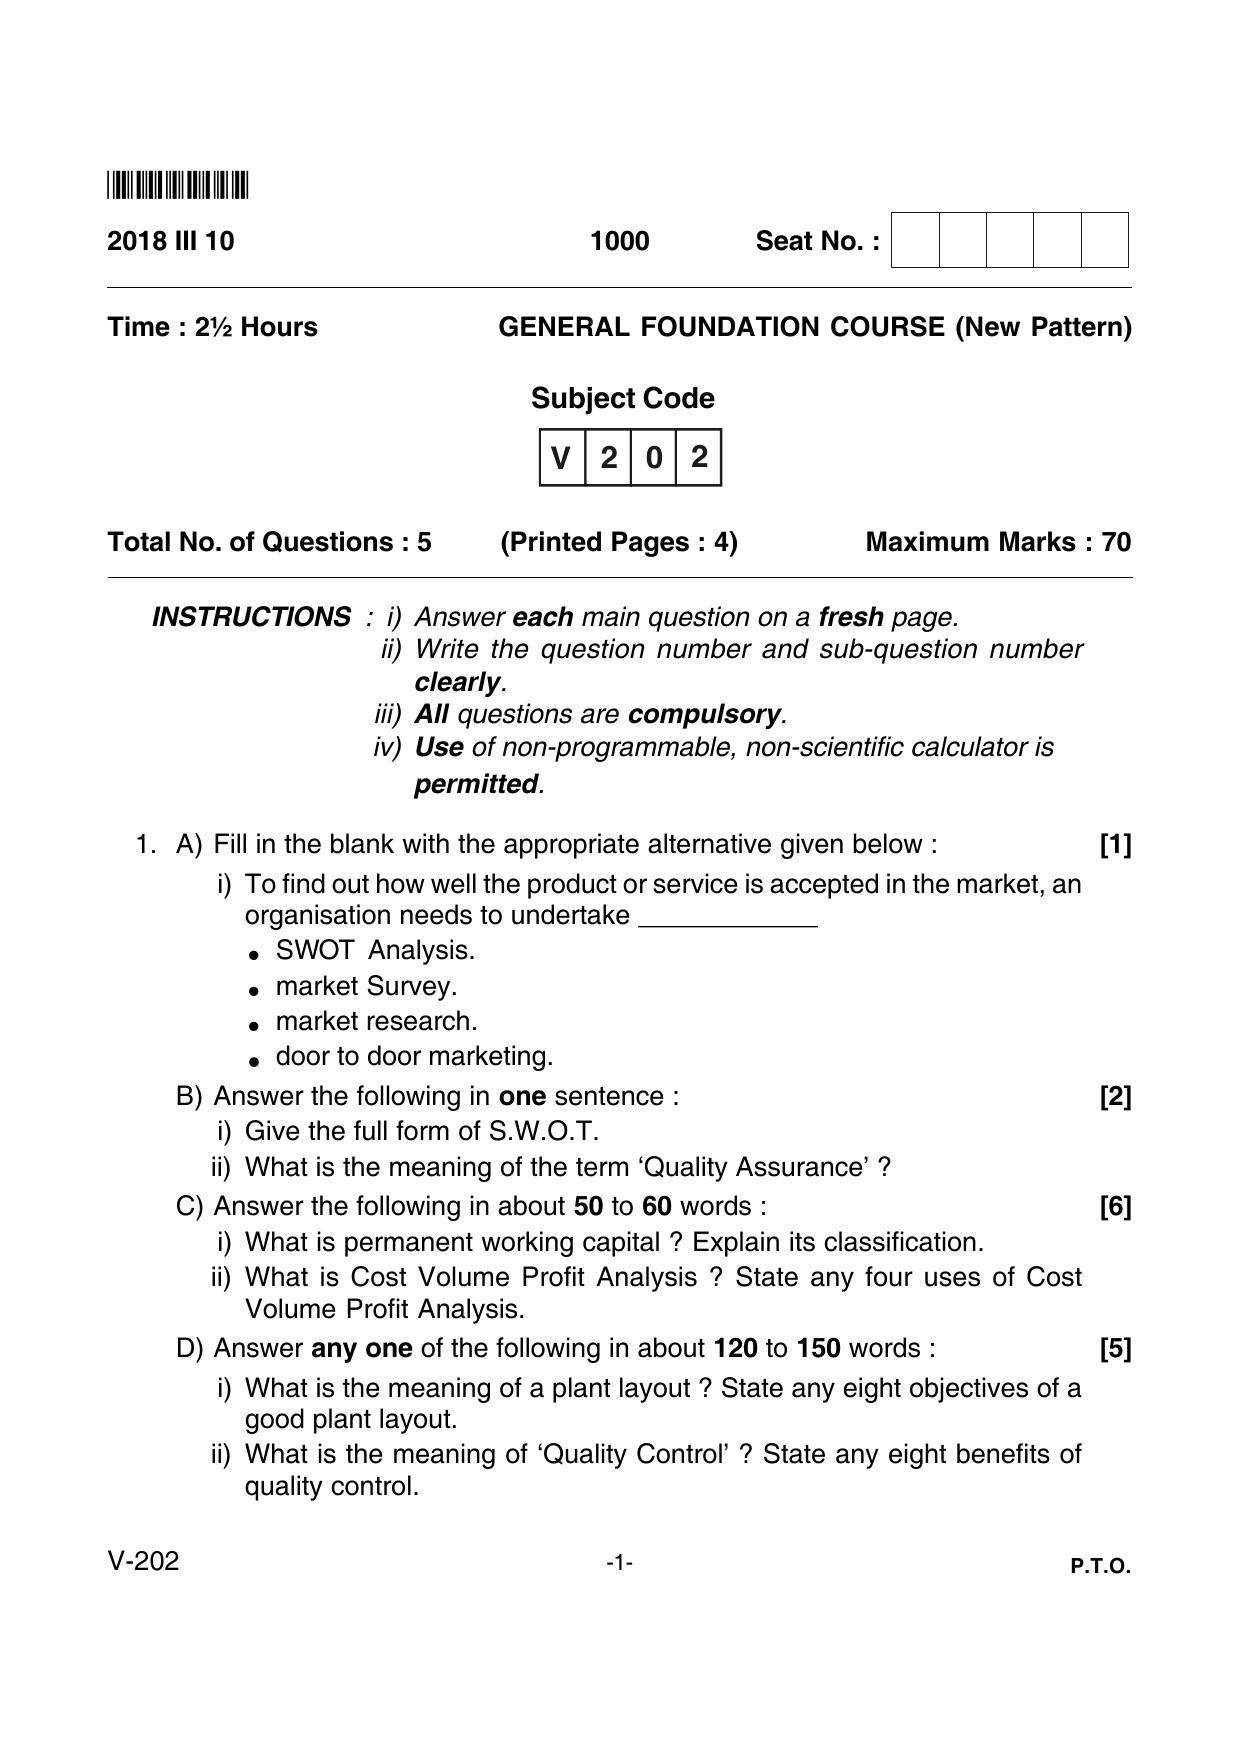 Goa Board Class 12 General Foundation Course  Voc 202 New Pattern (March 2018) Question Paper - Page 1